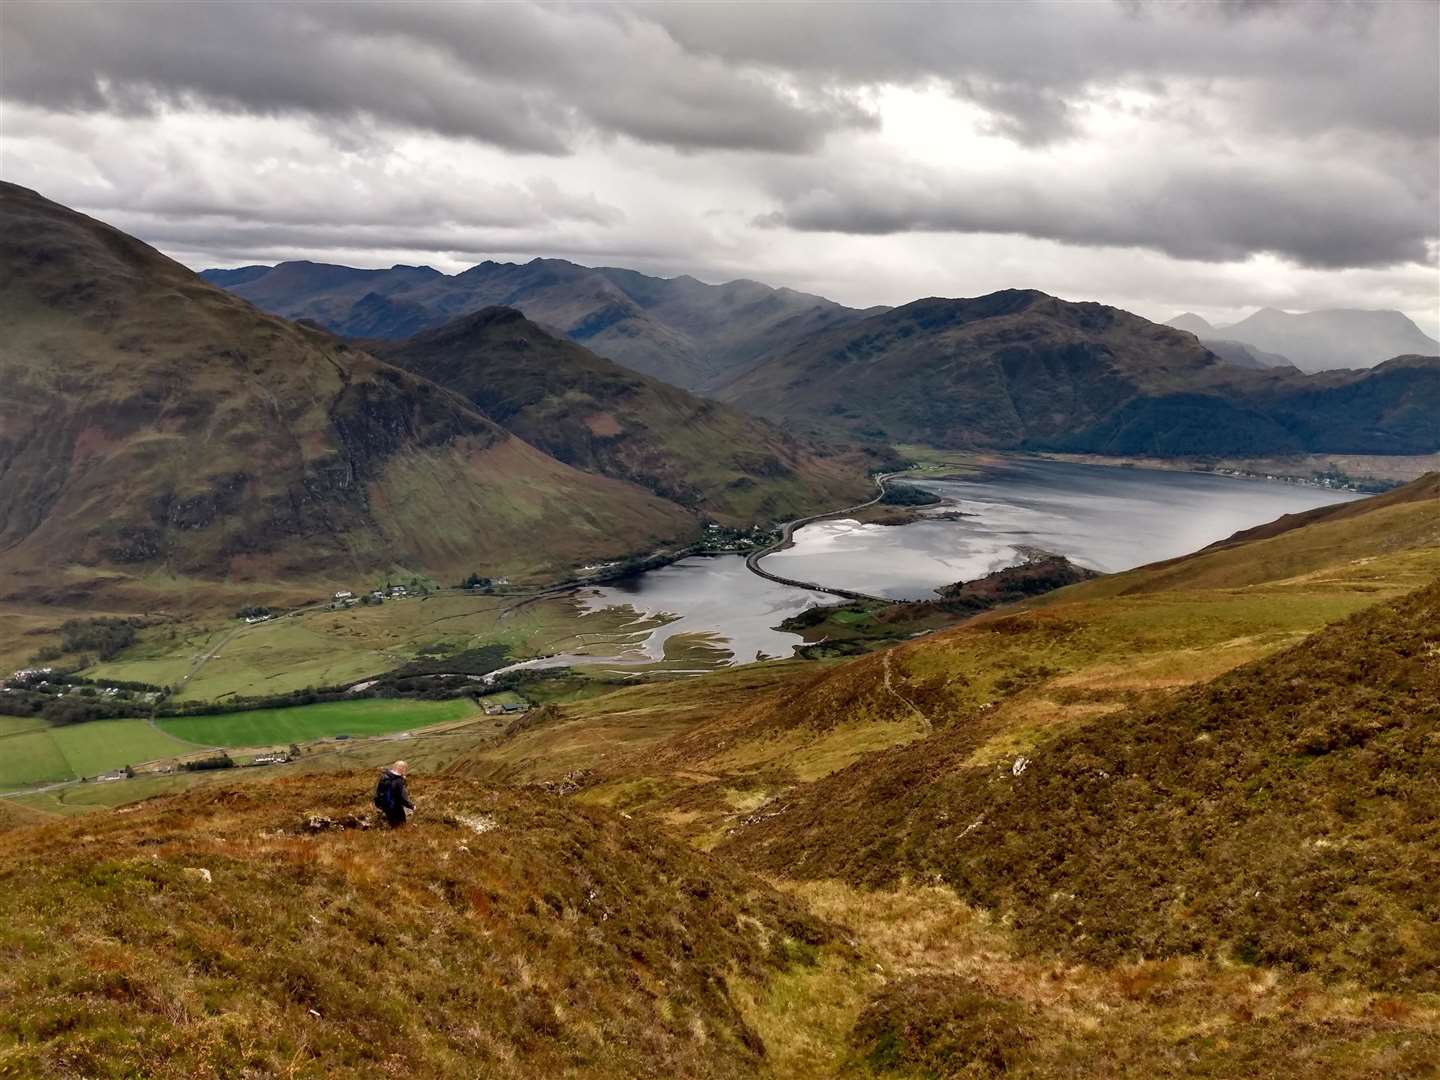 Heading back down with a fabulous view over Kintail.